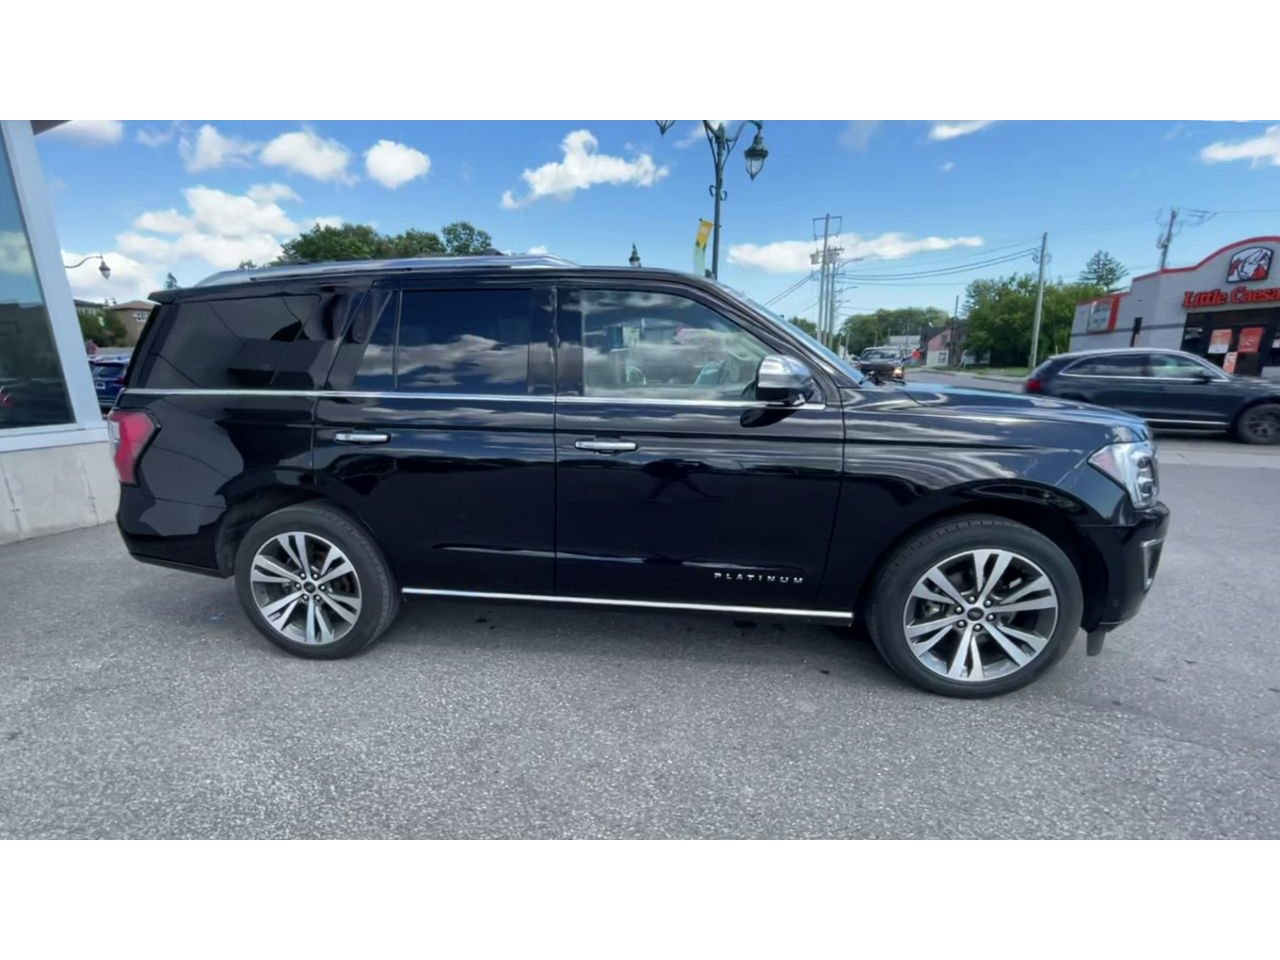 2021 Ford Expedition - P21237 Full Image 9